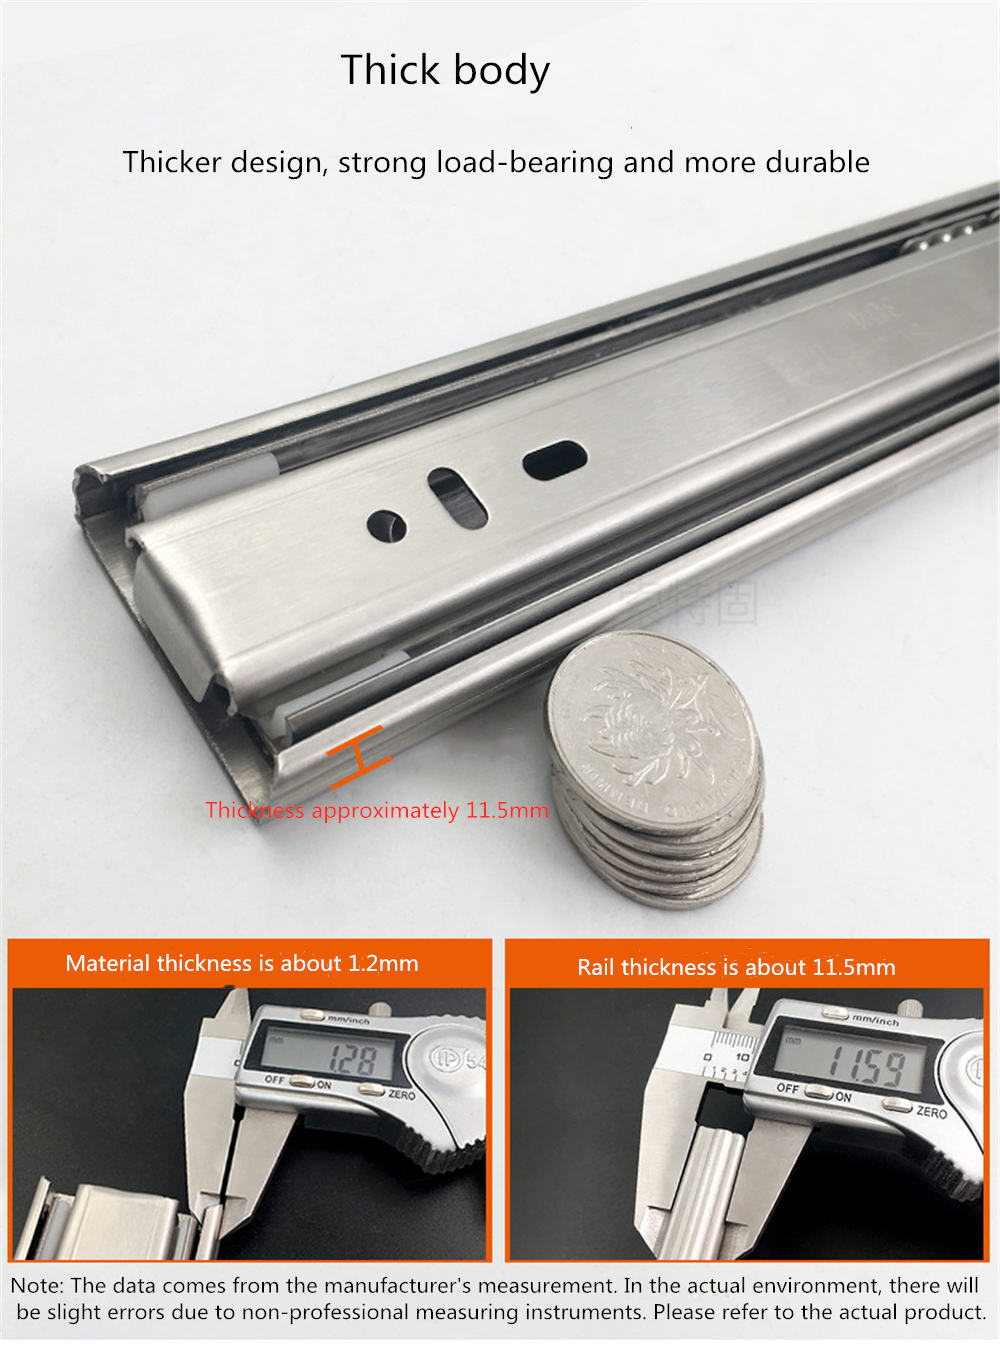 Cabinet-Damping-Slide-Rail-Three-section-Rail-Thickened-Stainless-Steel-Slide-Rail-Guide-Drawer-Buff-1791884-2